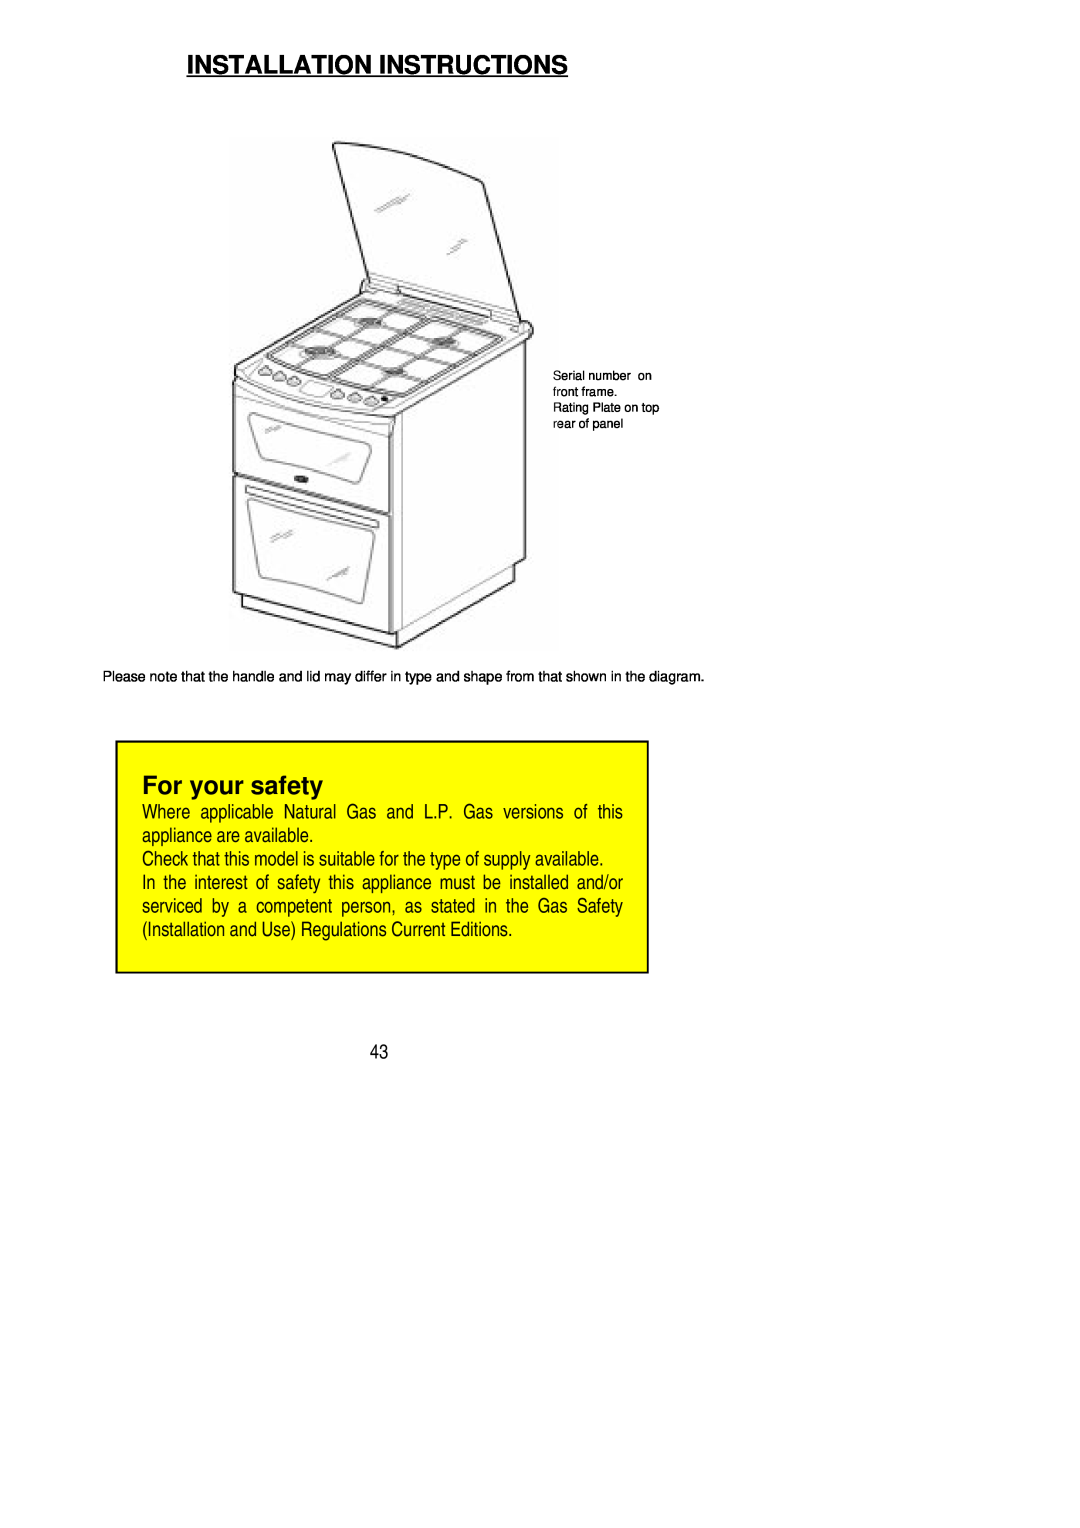 Electrolux SG 555 installation instructions Installation Instructions, For your safety 